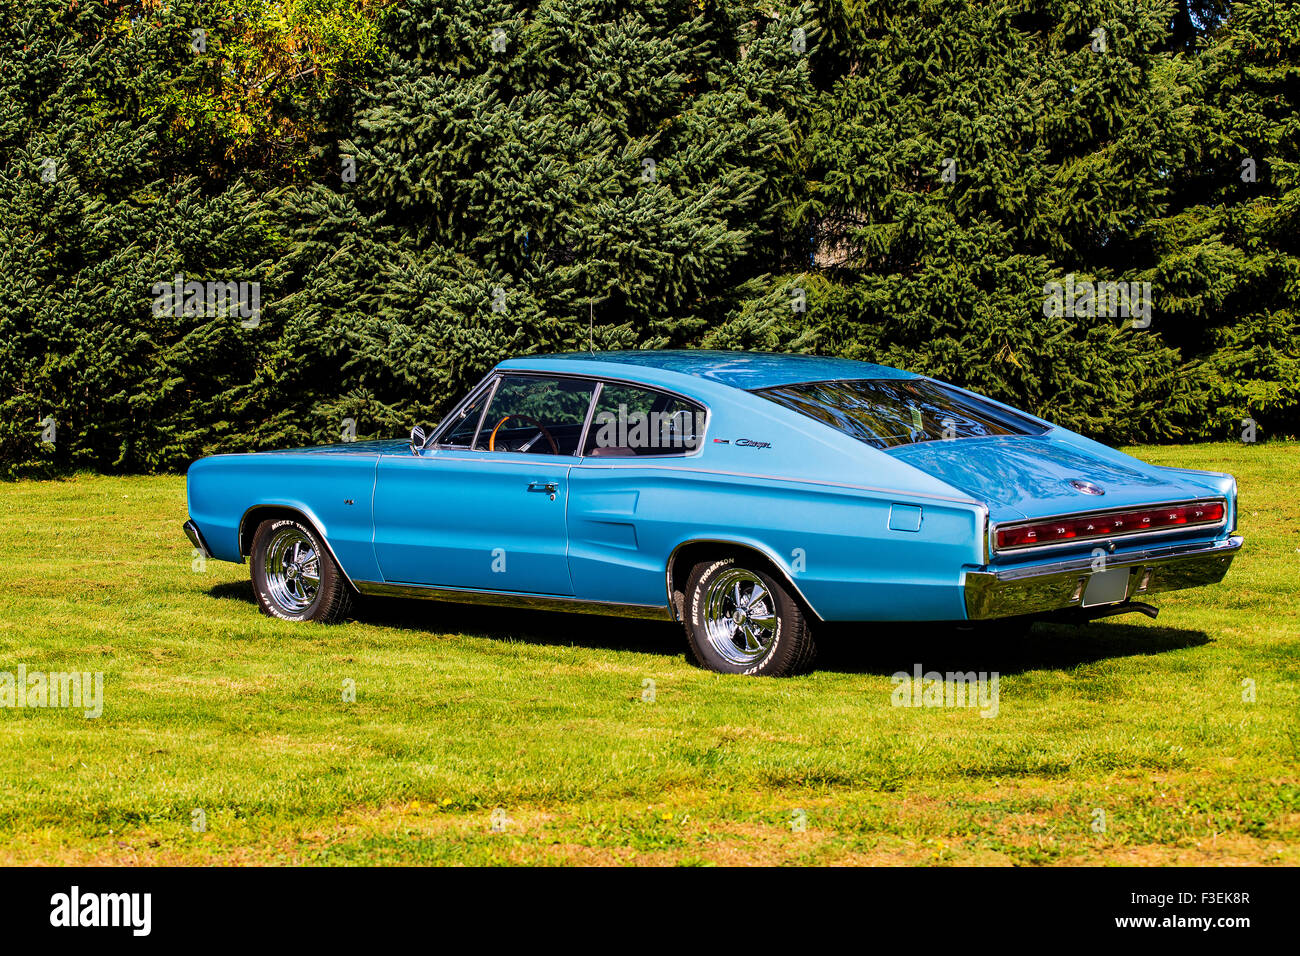 1966 Dodge Charger on grass Stock Photo